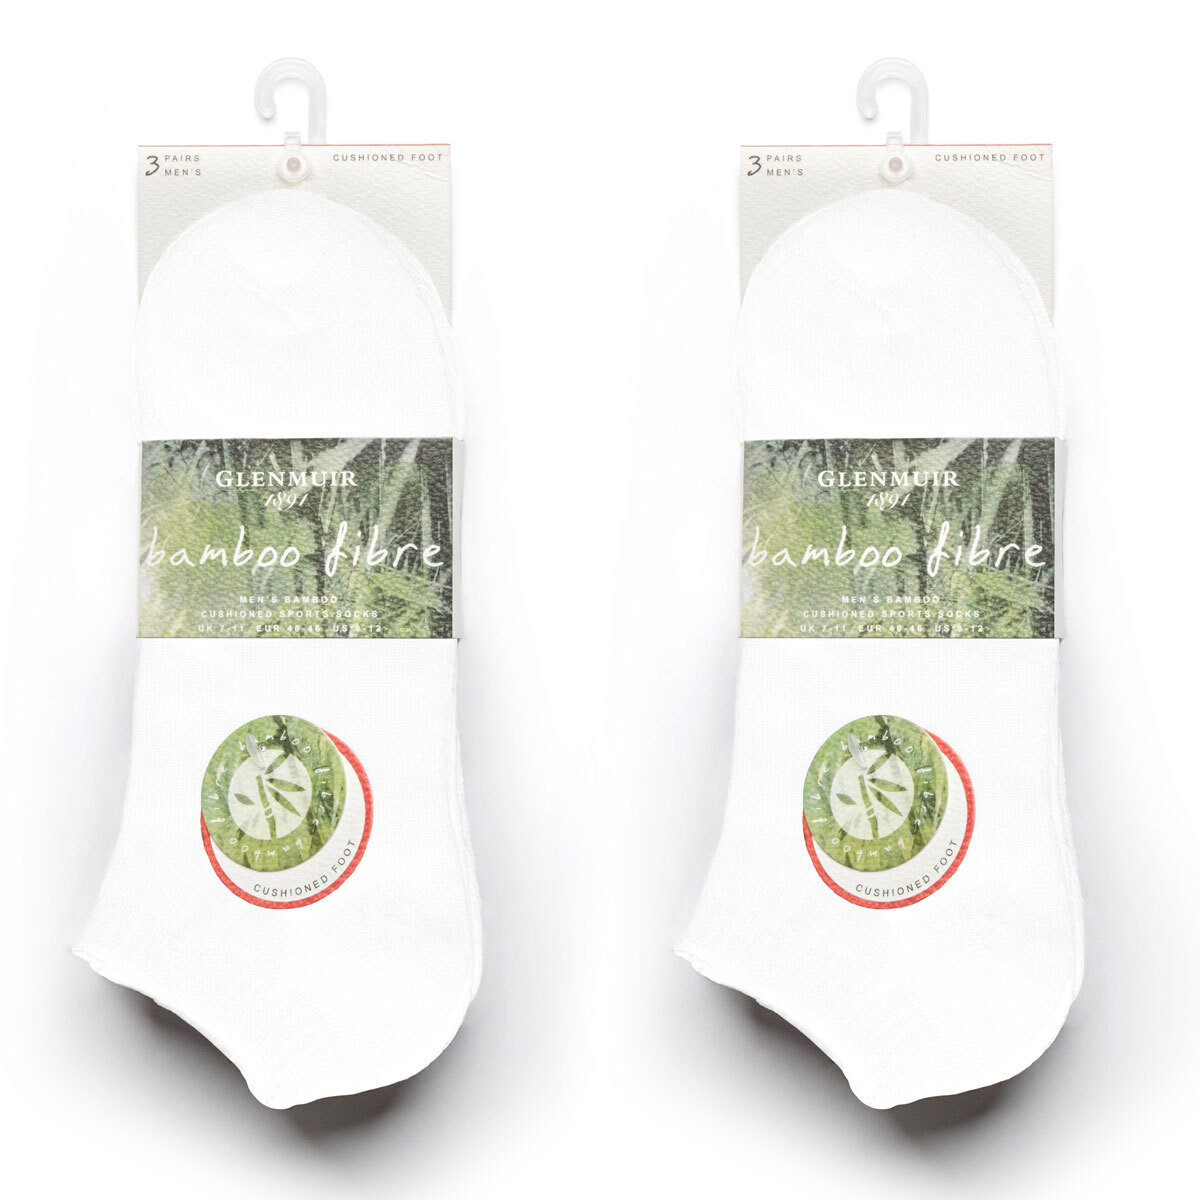 Glenmuir Men's 2 x 3 Pack Bamboo Cushioned Trainer Socks in White, Size 7-11